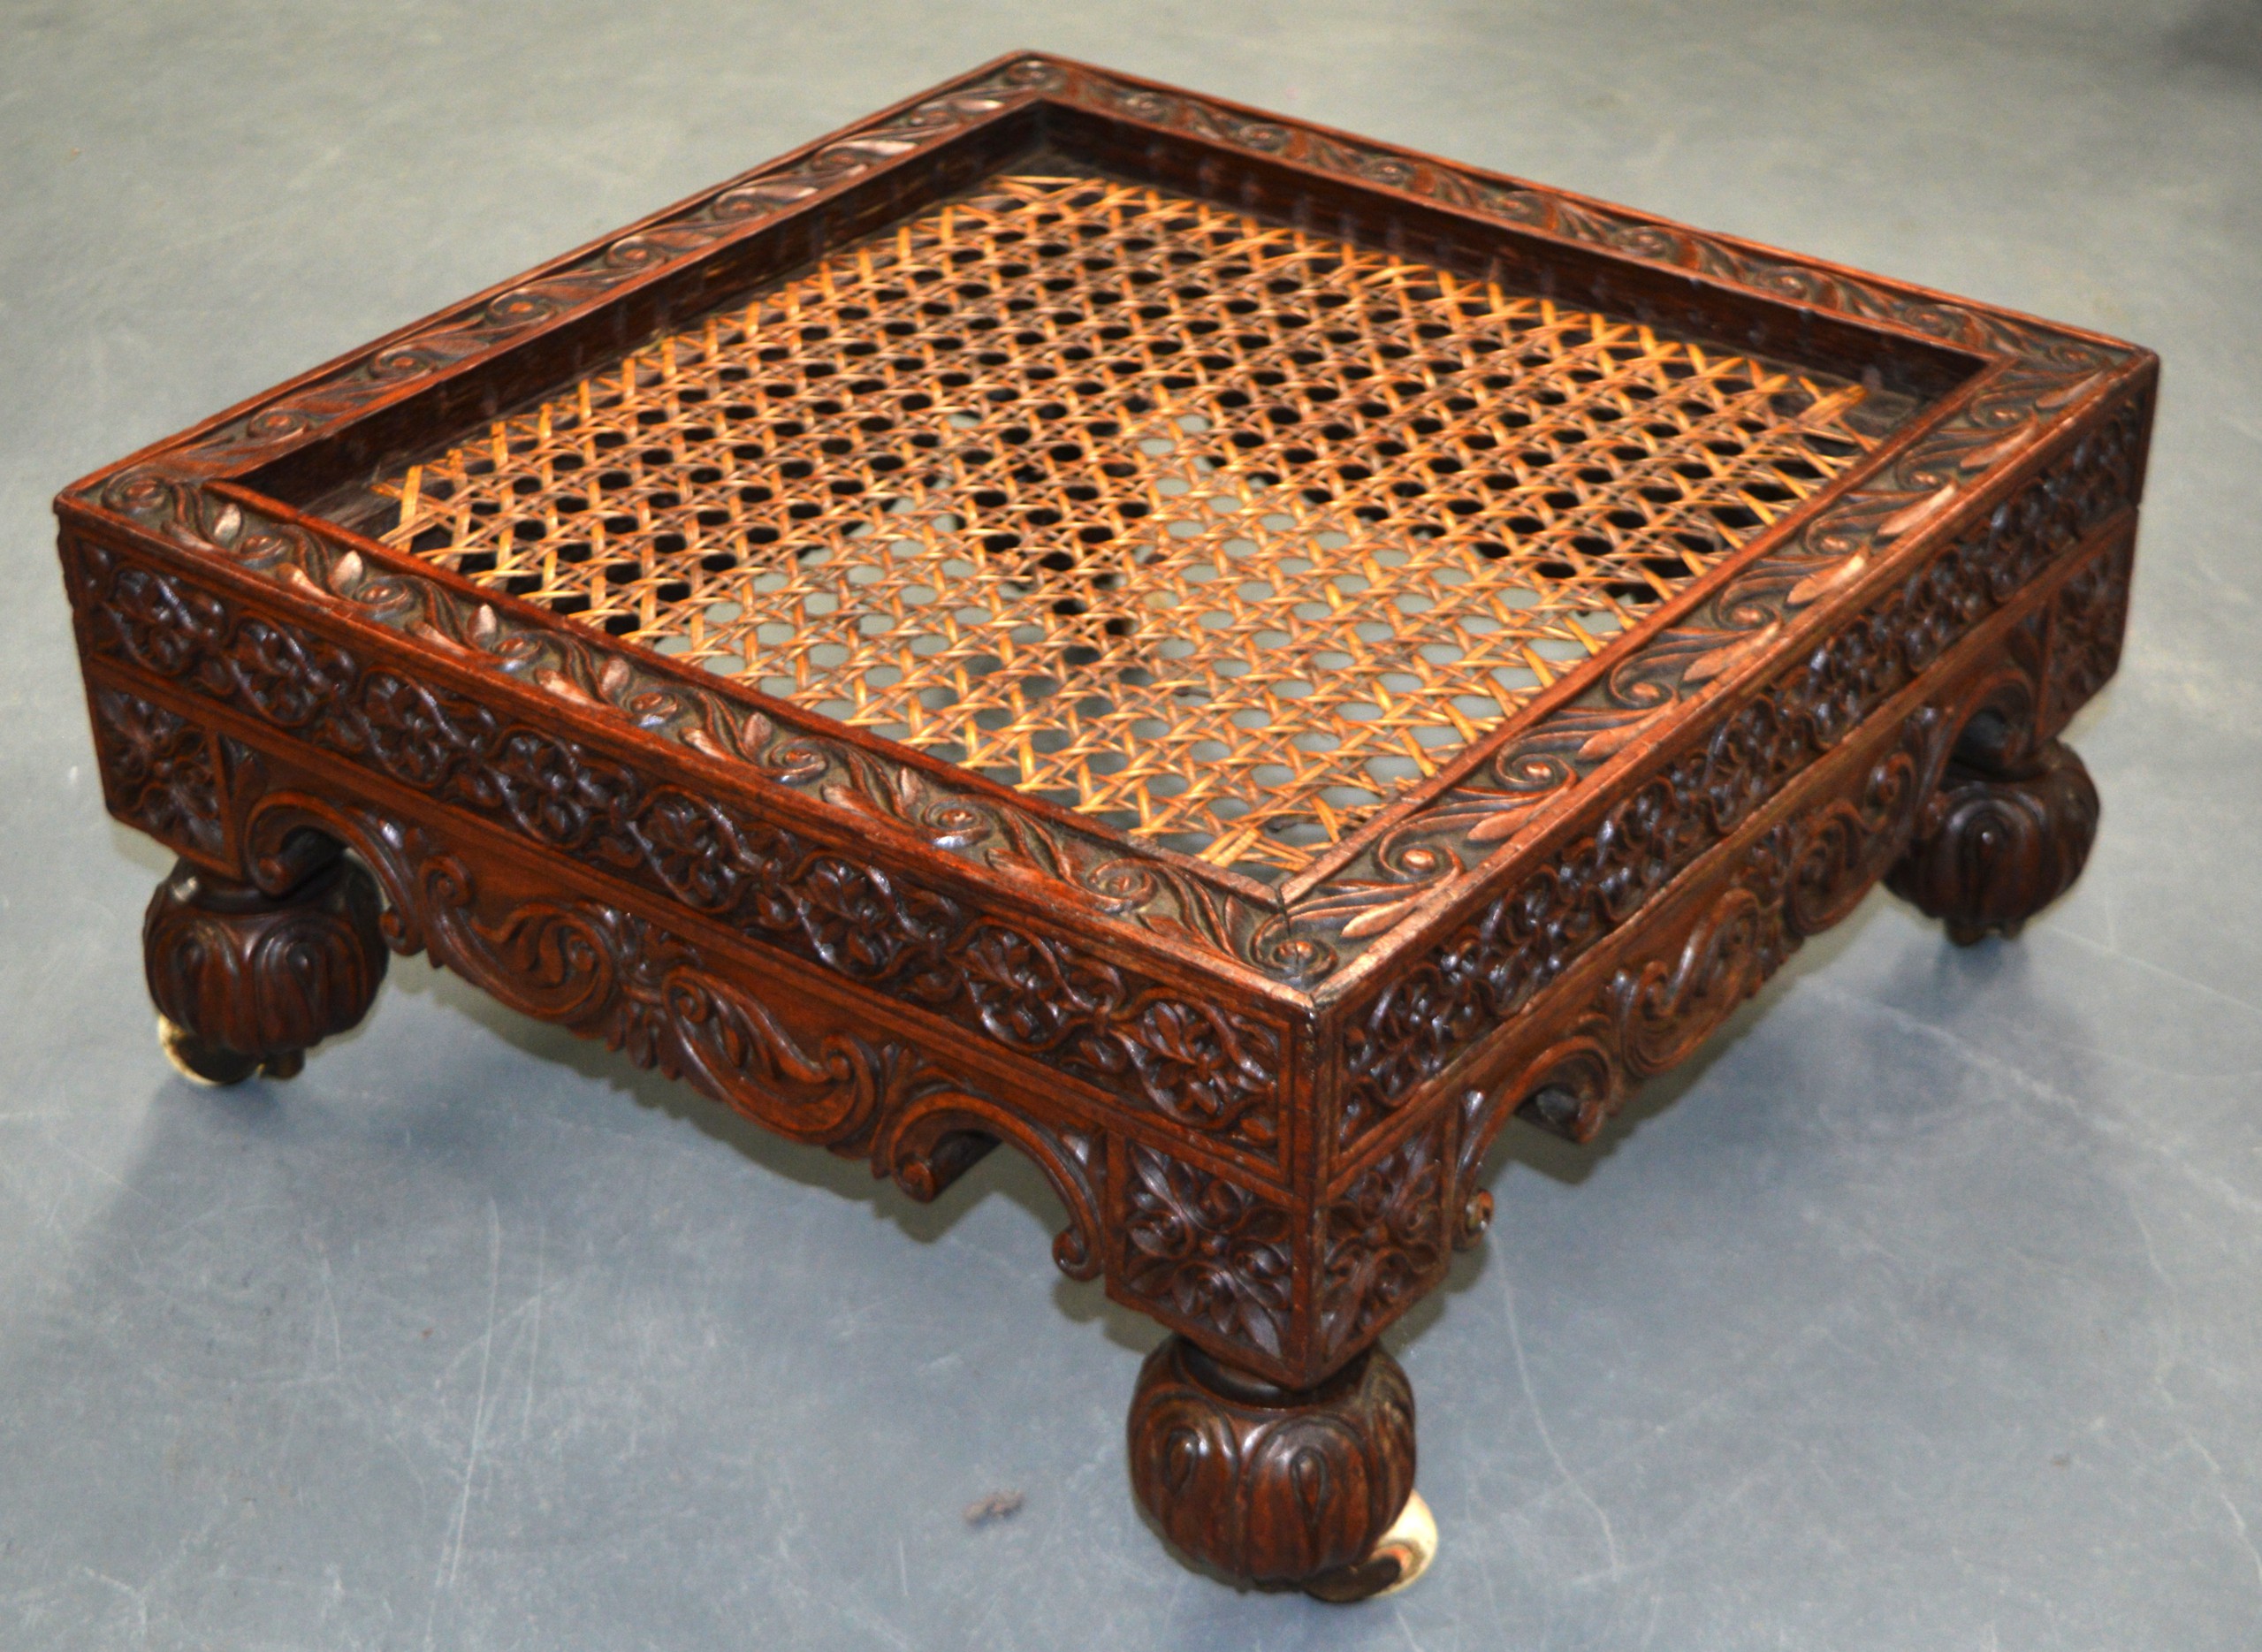 A GOOD 19TH CENTURY ANGLO INDIAN CARVED WOOD STOOL with profusely carved scrolling vines. 1Ft 5ins